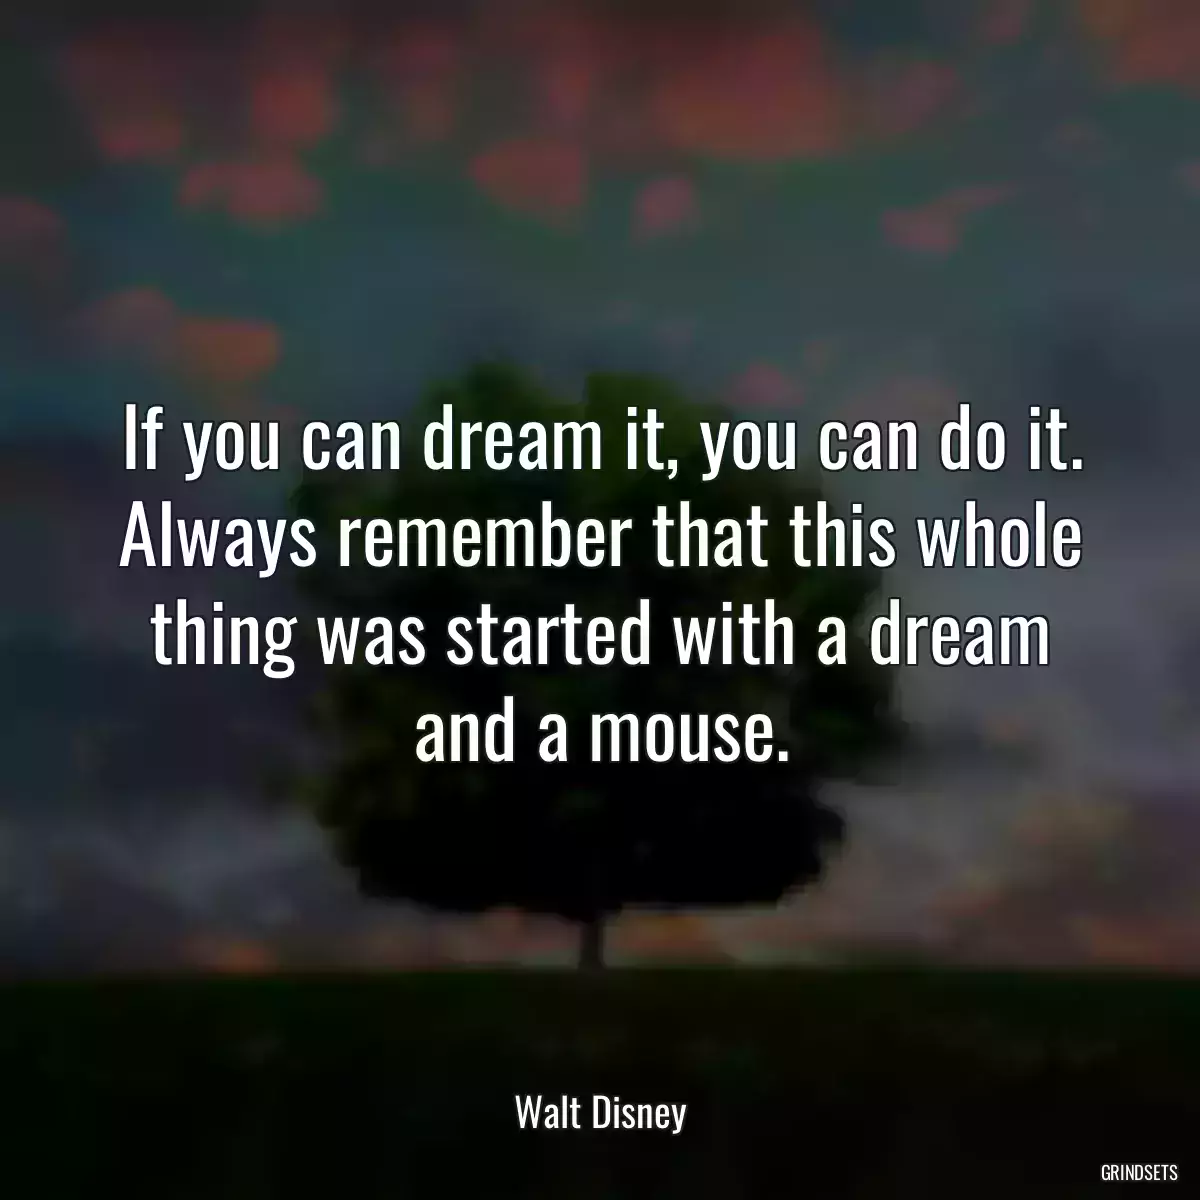 If you can dream it, you can do it. Always remember that this whole thing was started with a dream and a mouse.